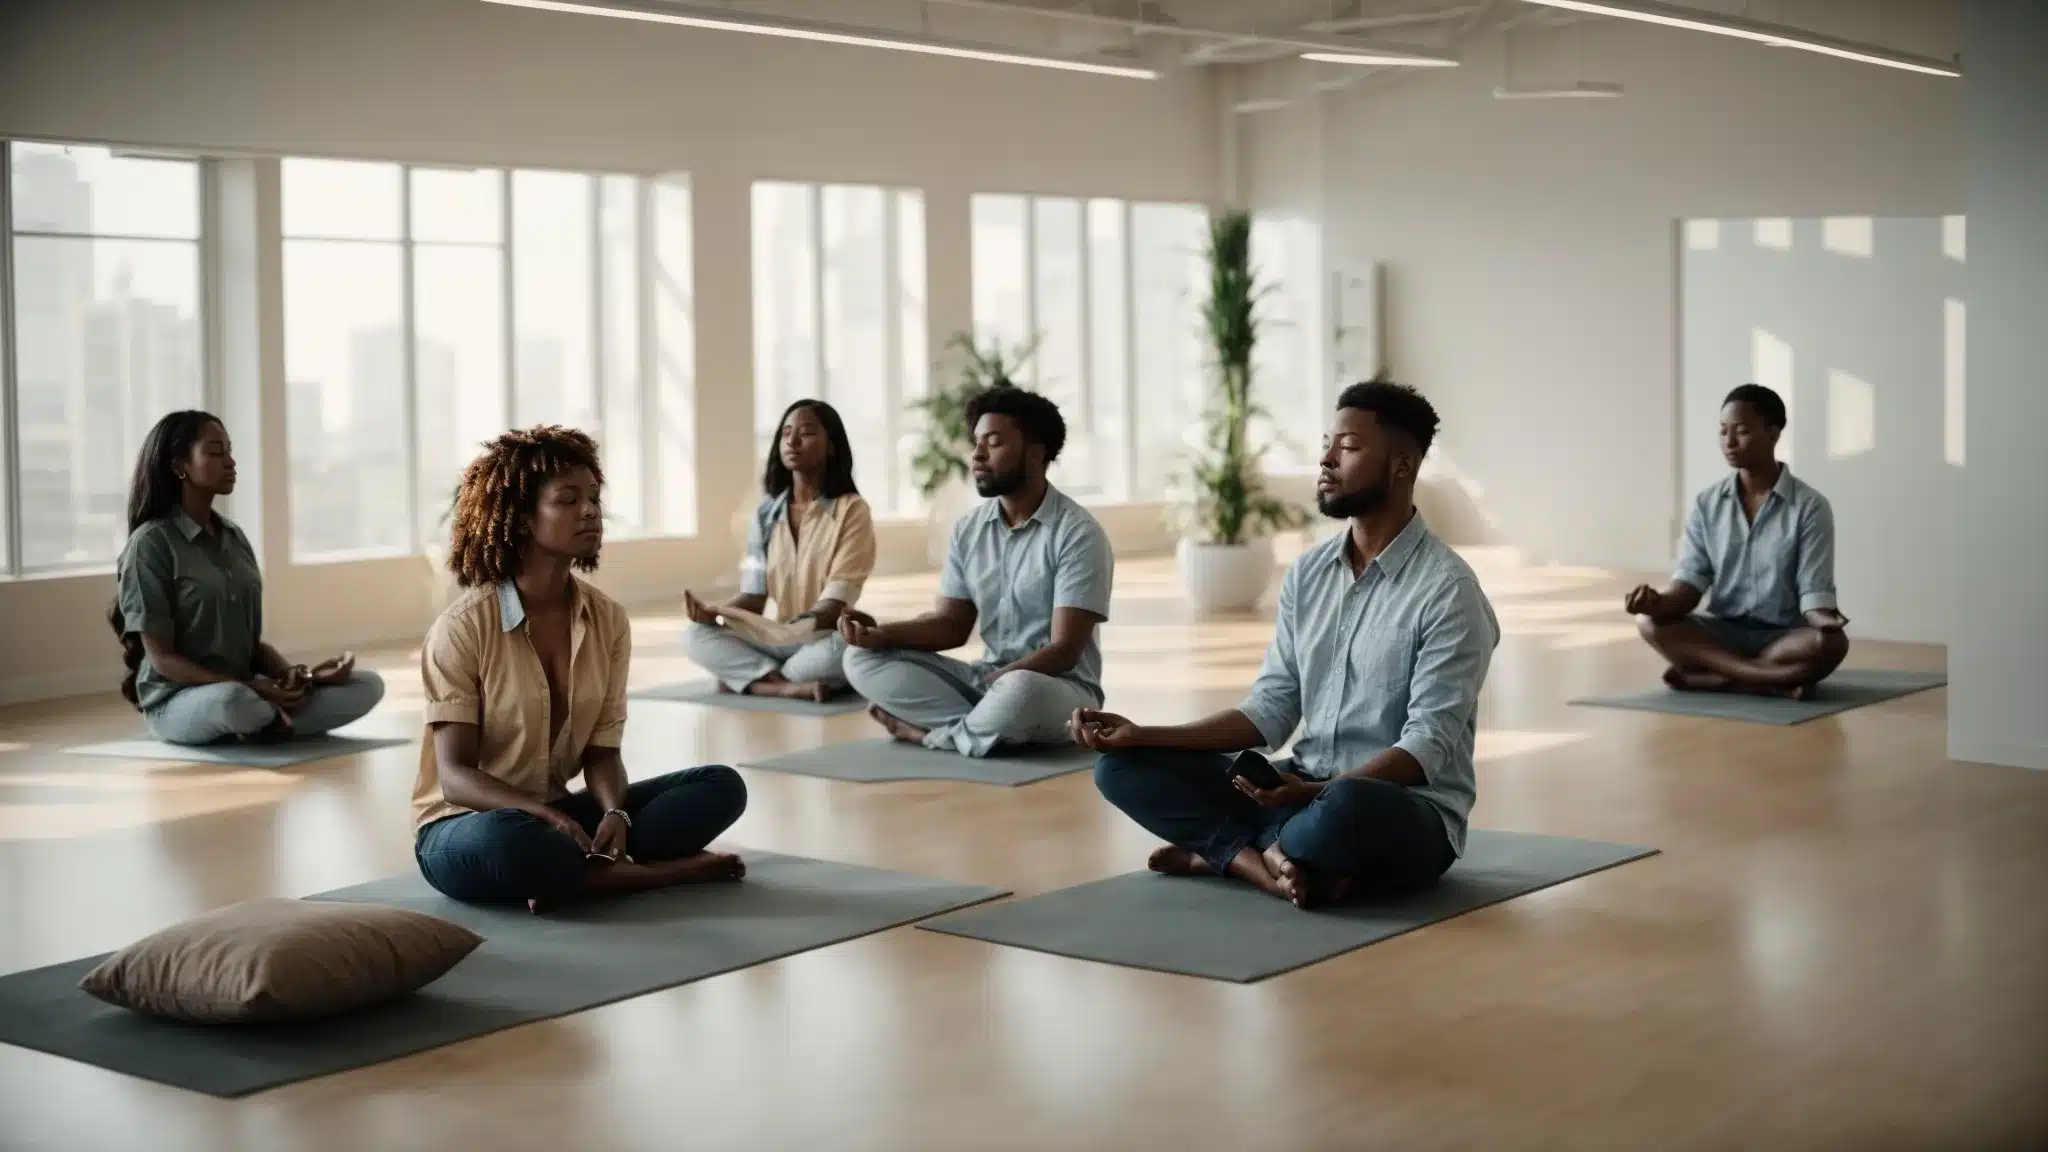 A Group Of Co-Workers Engaging In A Stress-Relieving Meditation Session In A Bright Office Space.